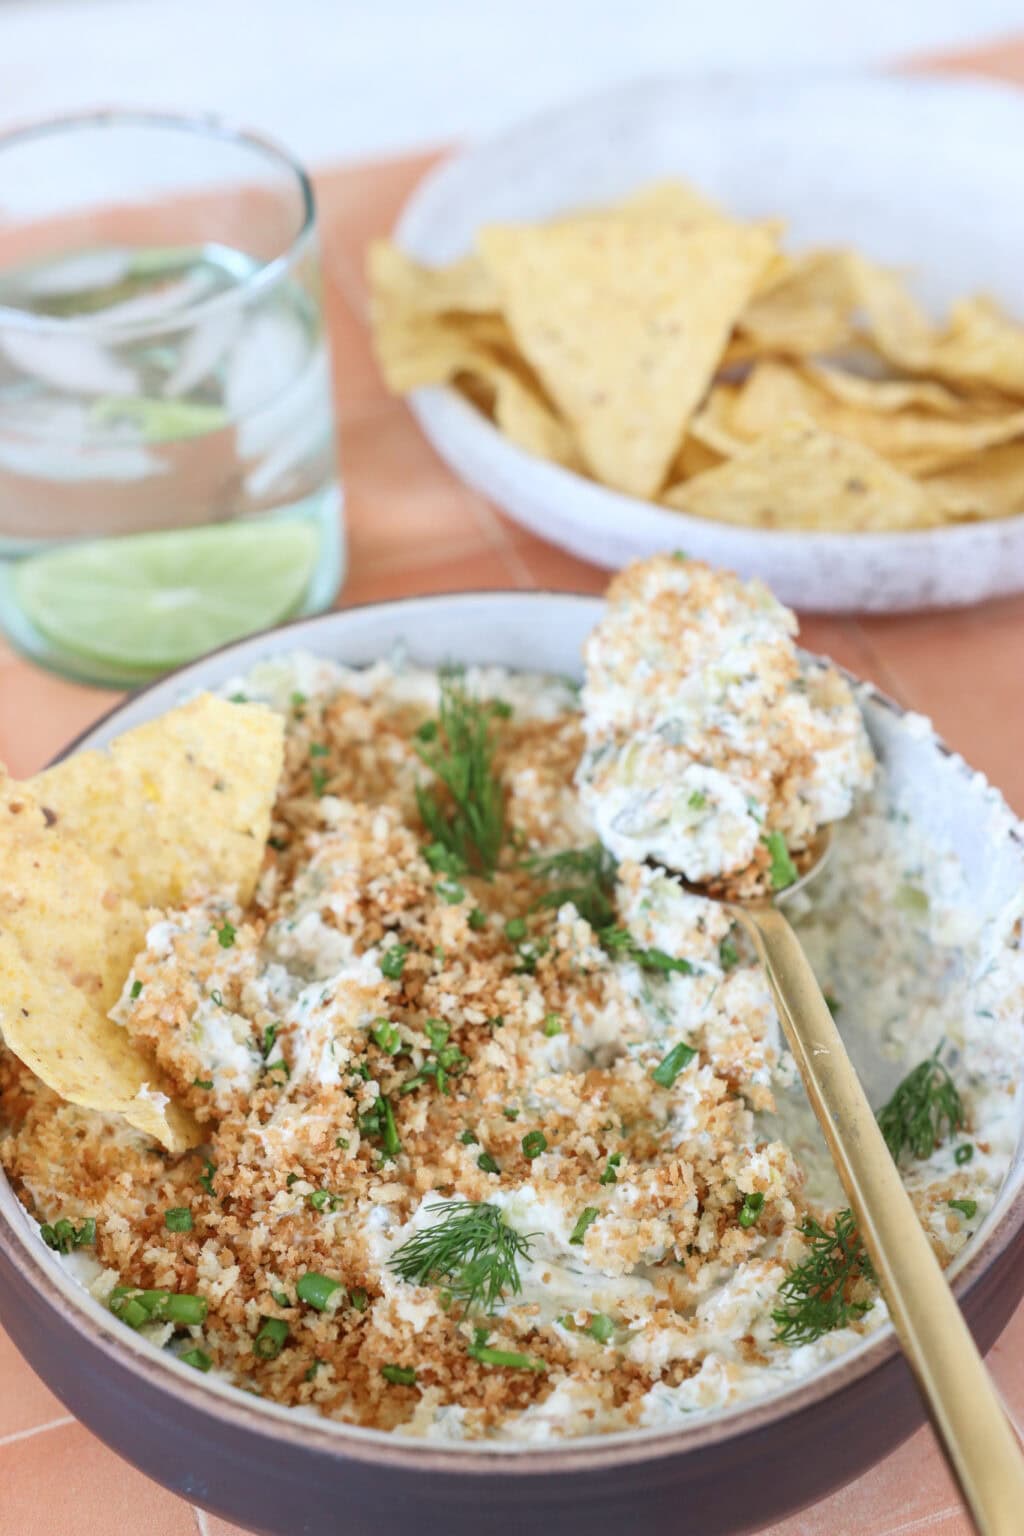 Seriously Good "Fried" Pickle Dip with Greek Yogurt in a white bowl with a scoop on a spoon and dishes on the side